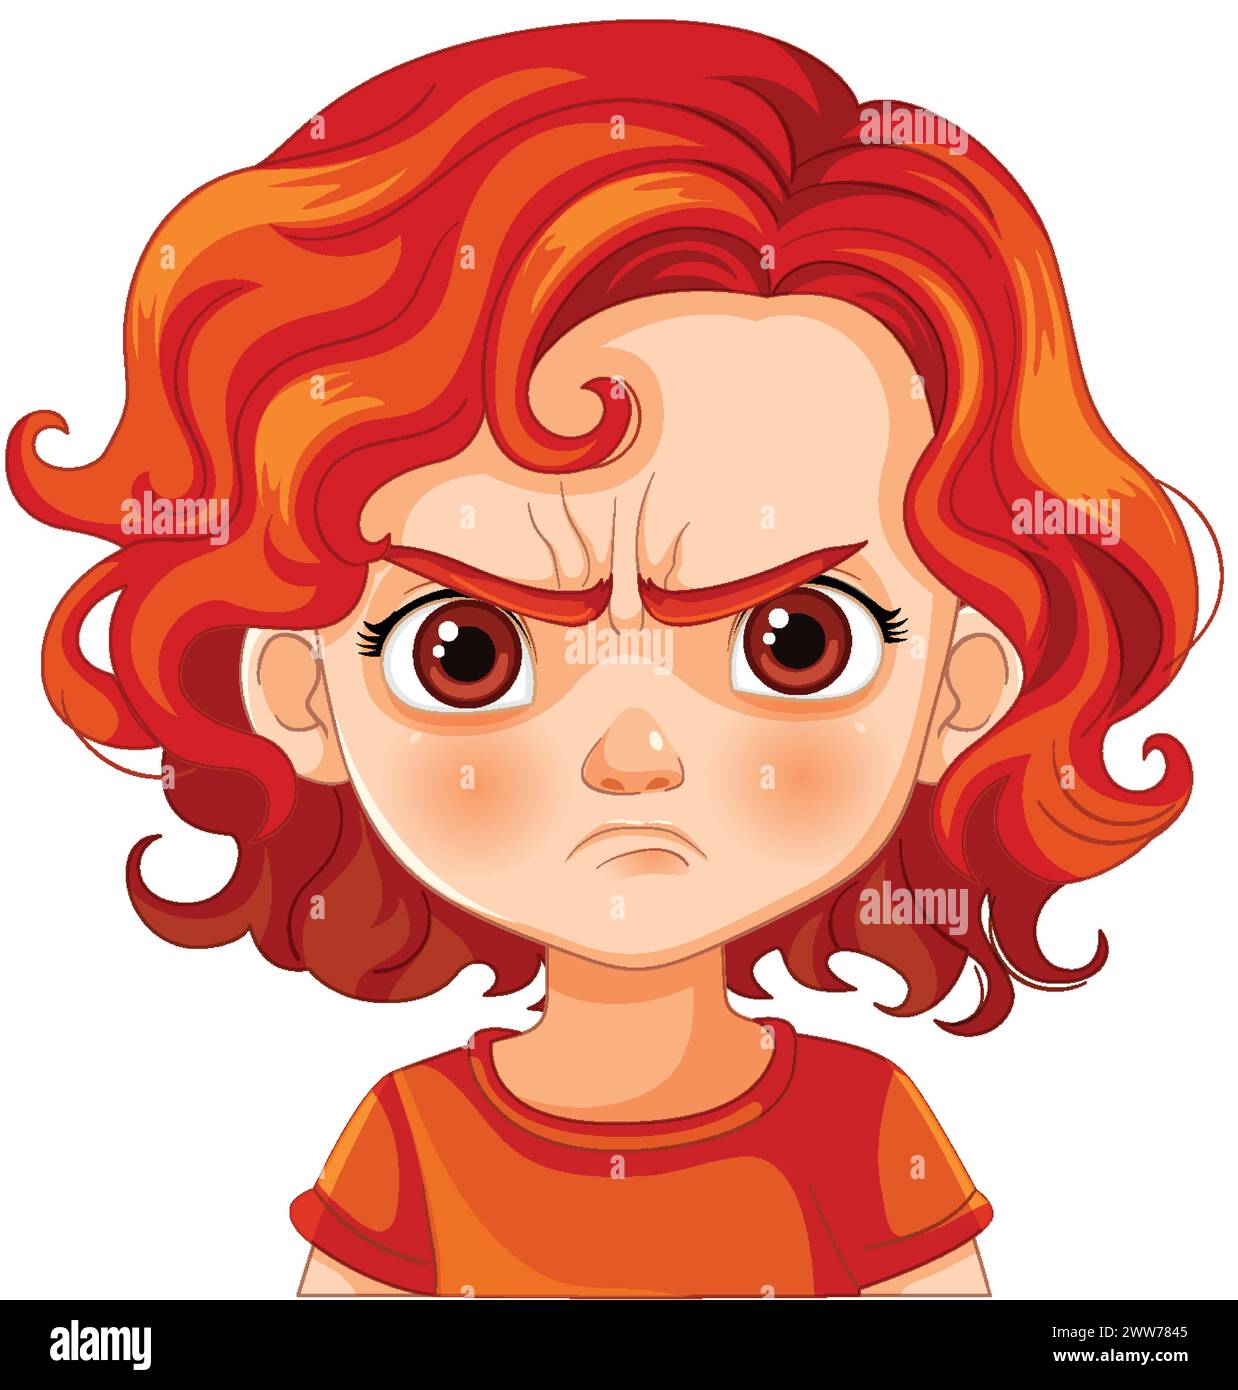 Vector illustration of a frowning young girl Stock Vector